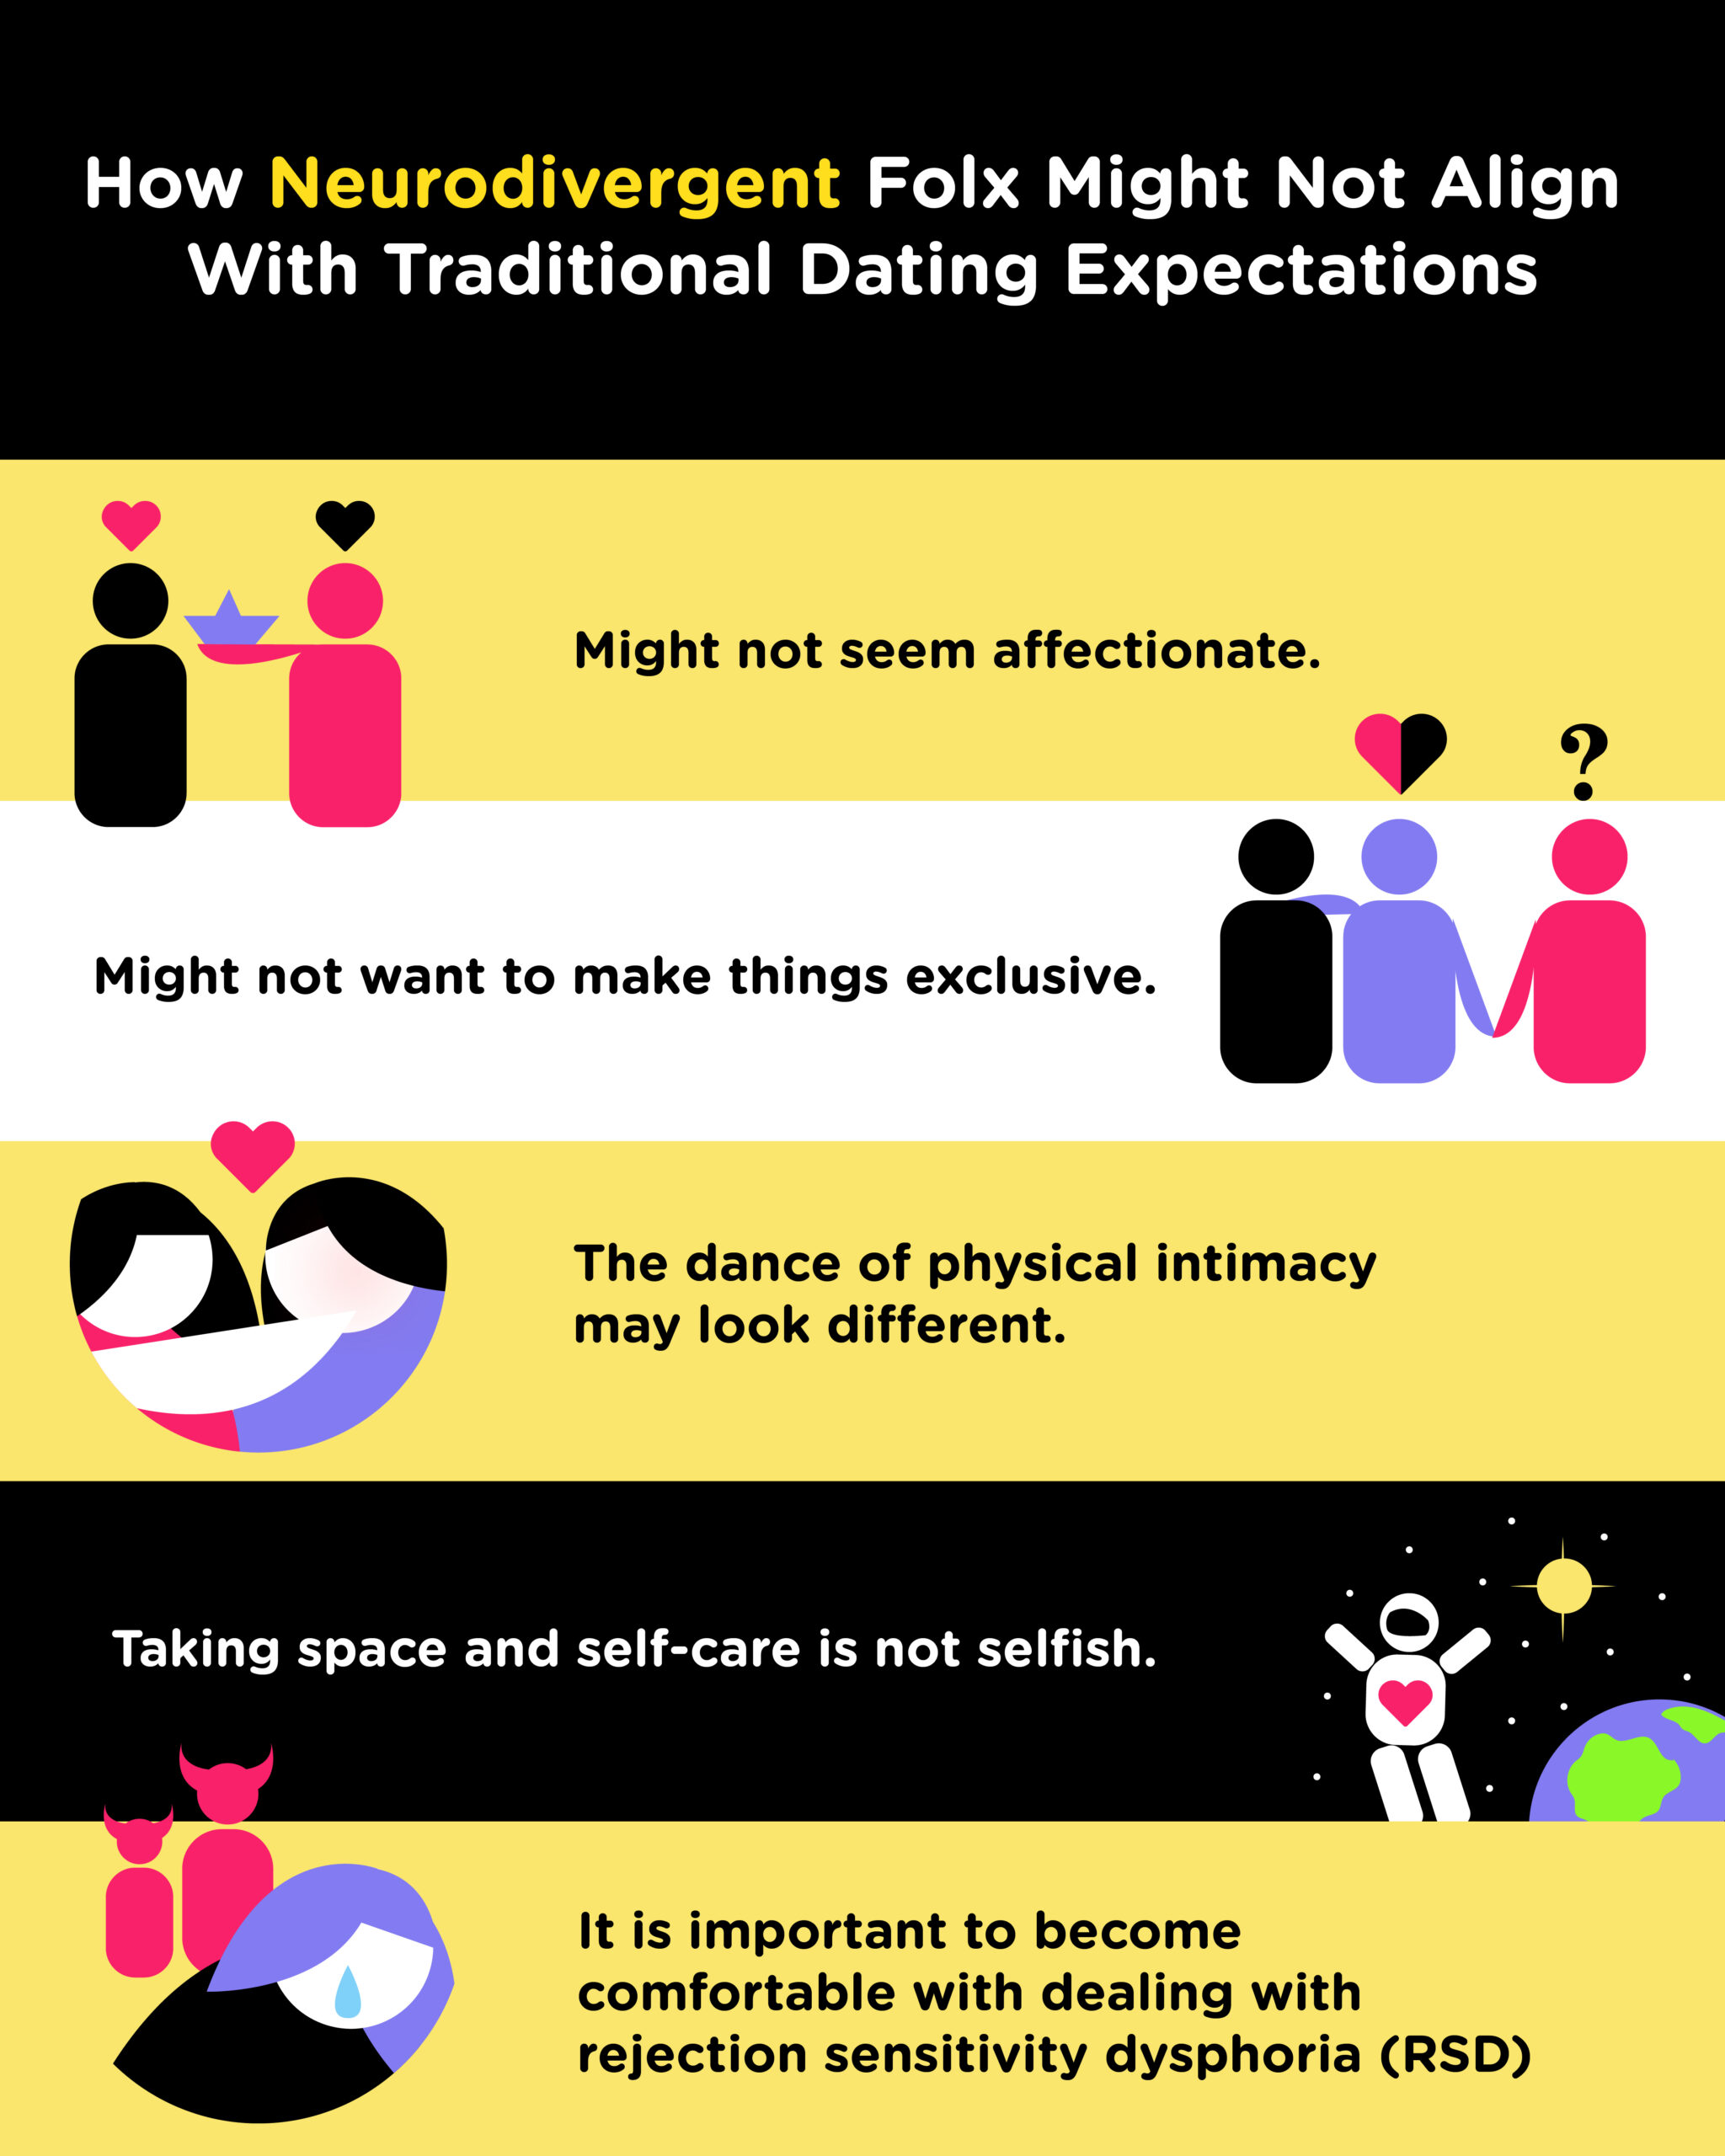 How Neurodivergent Folx Might Not Align With Traditional Dating Expectations